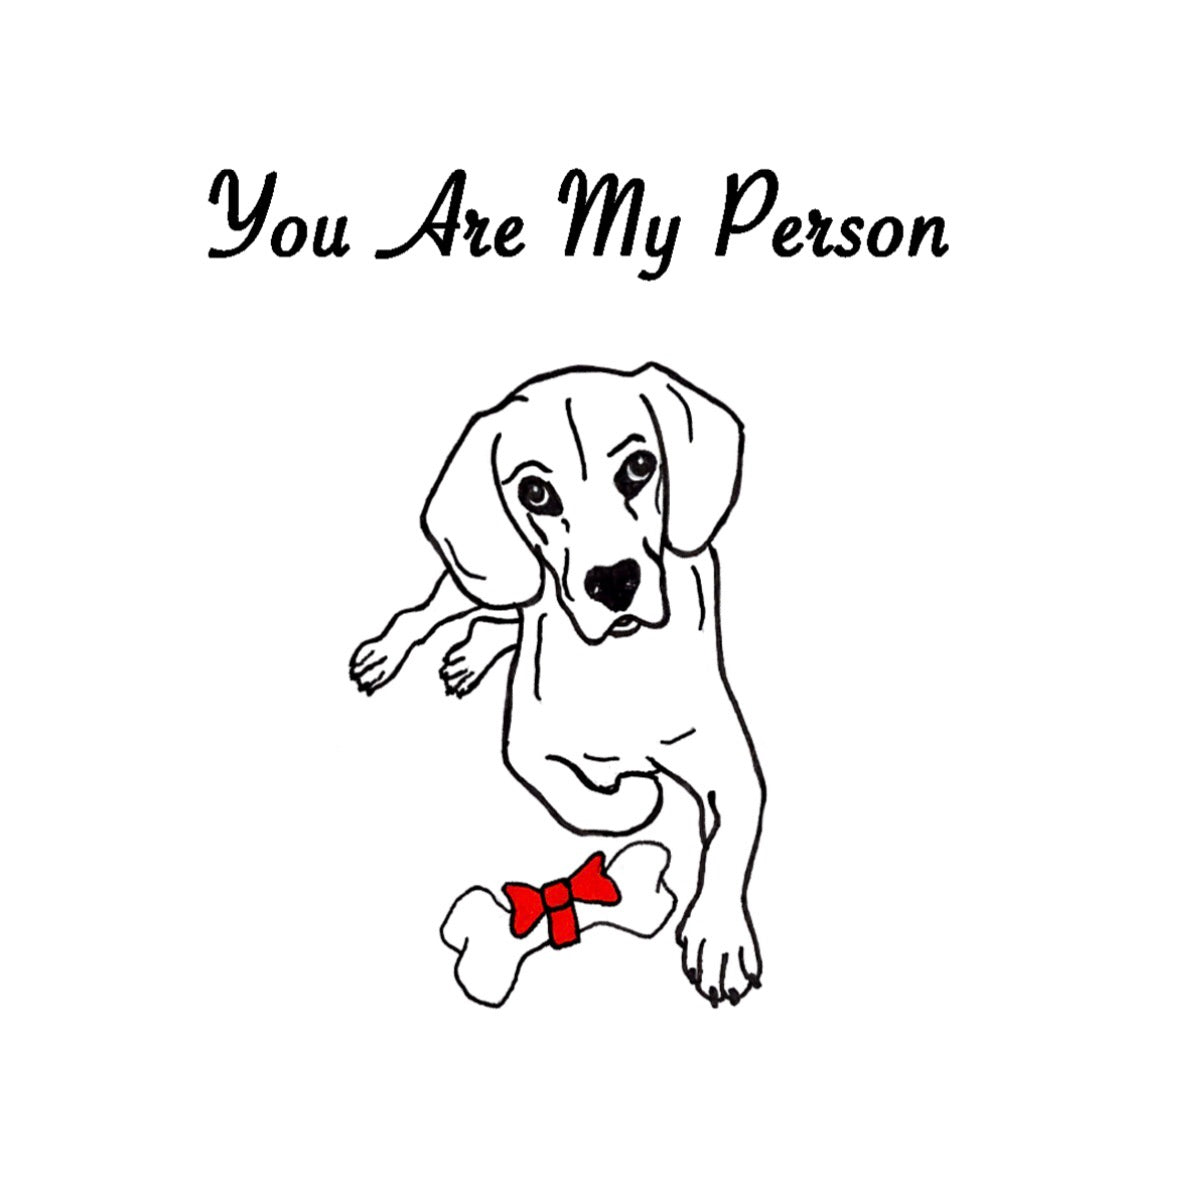 You Are My Person - Happy Holidays Greeting Card